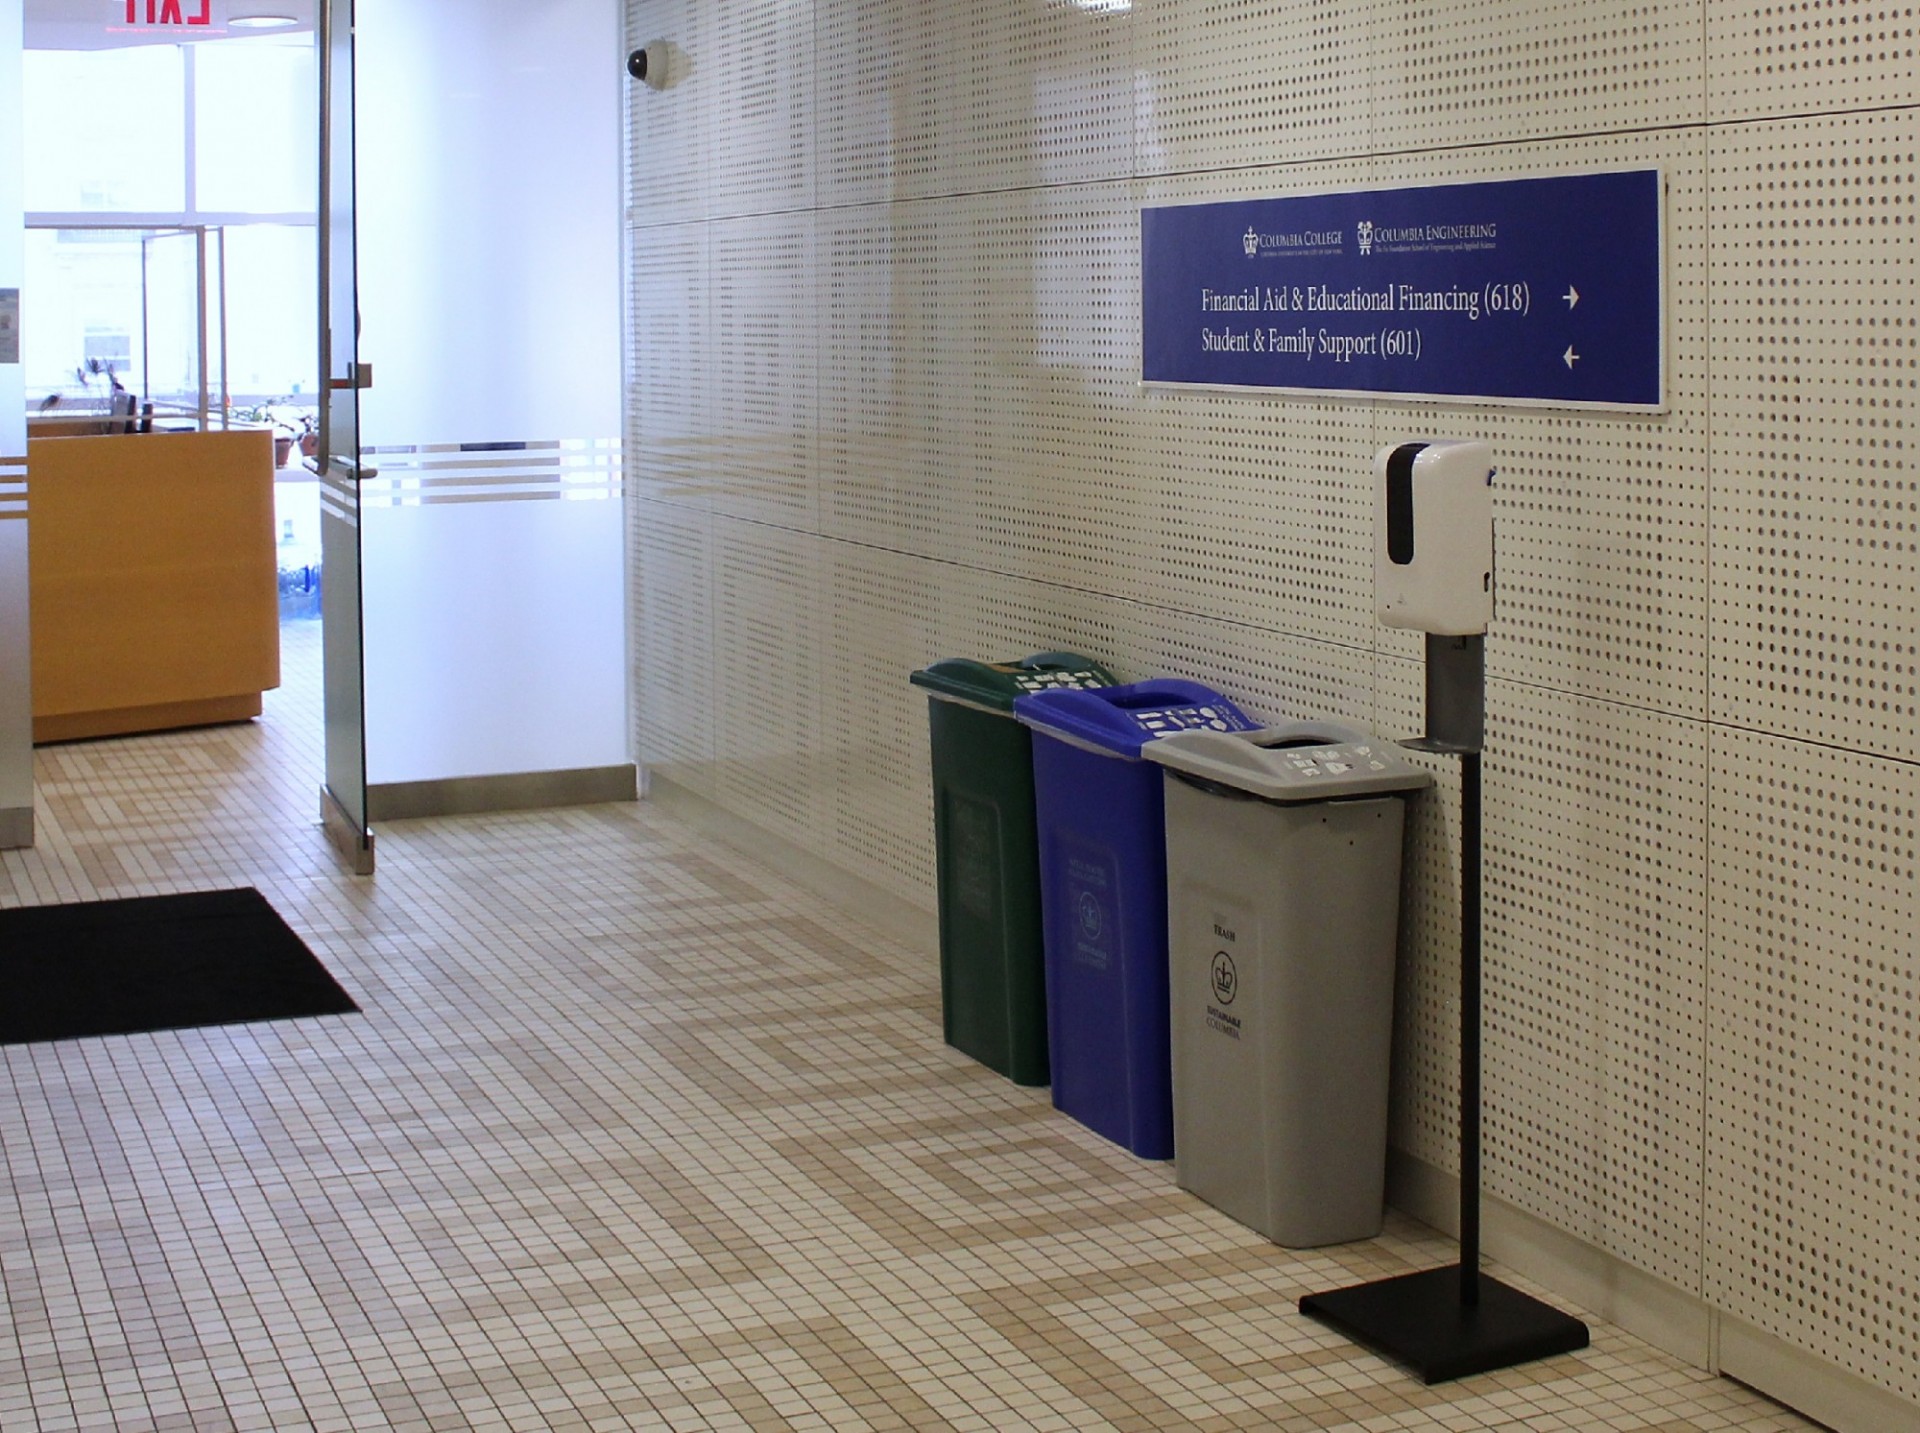 Recycling bins and a waste bin sit in a central hallway outside an office in Lerner Hall